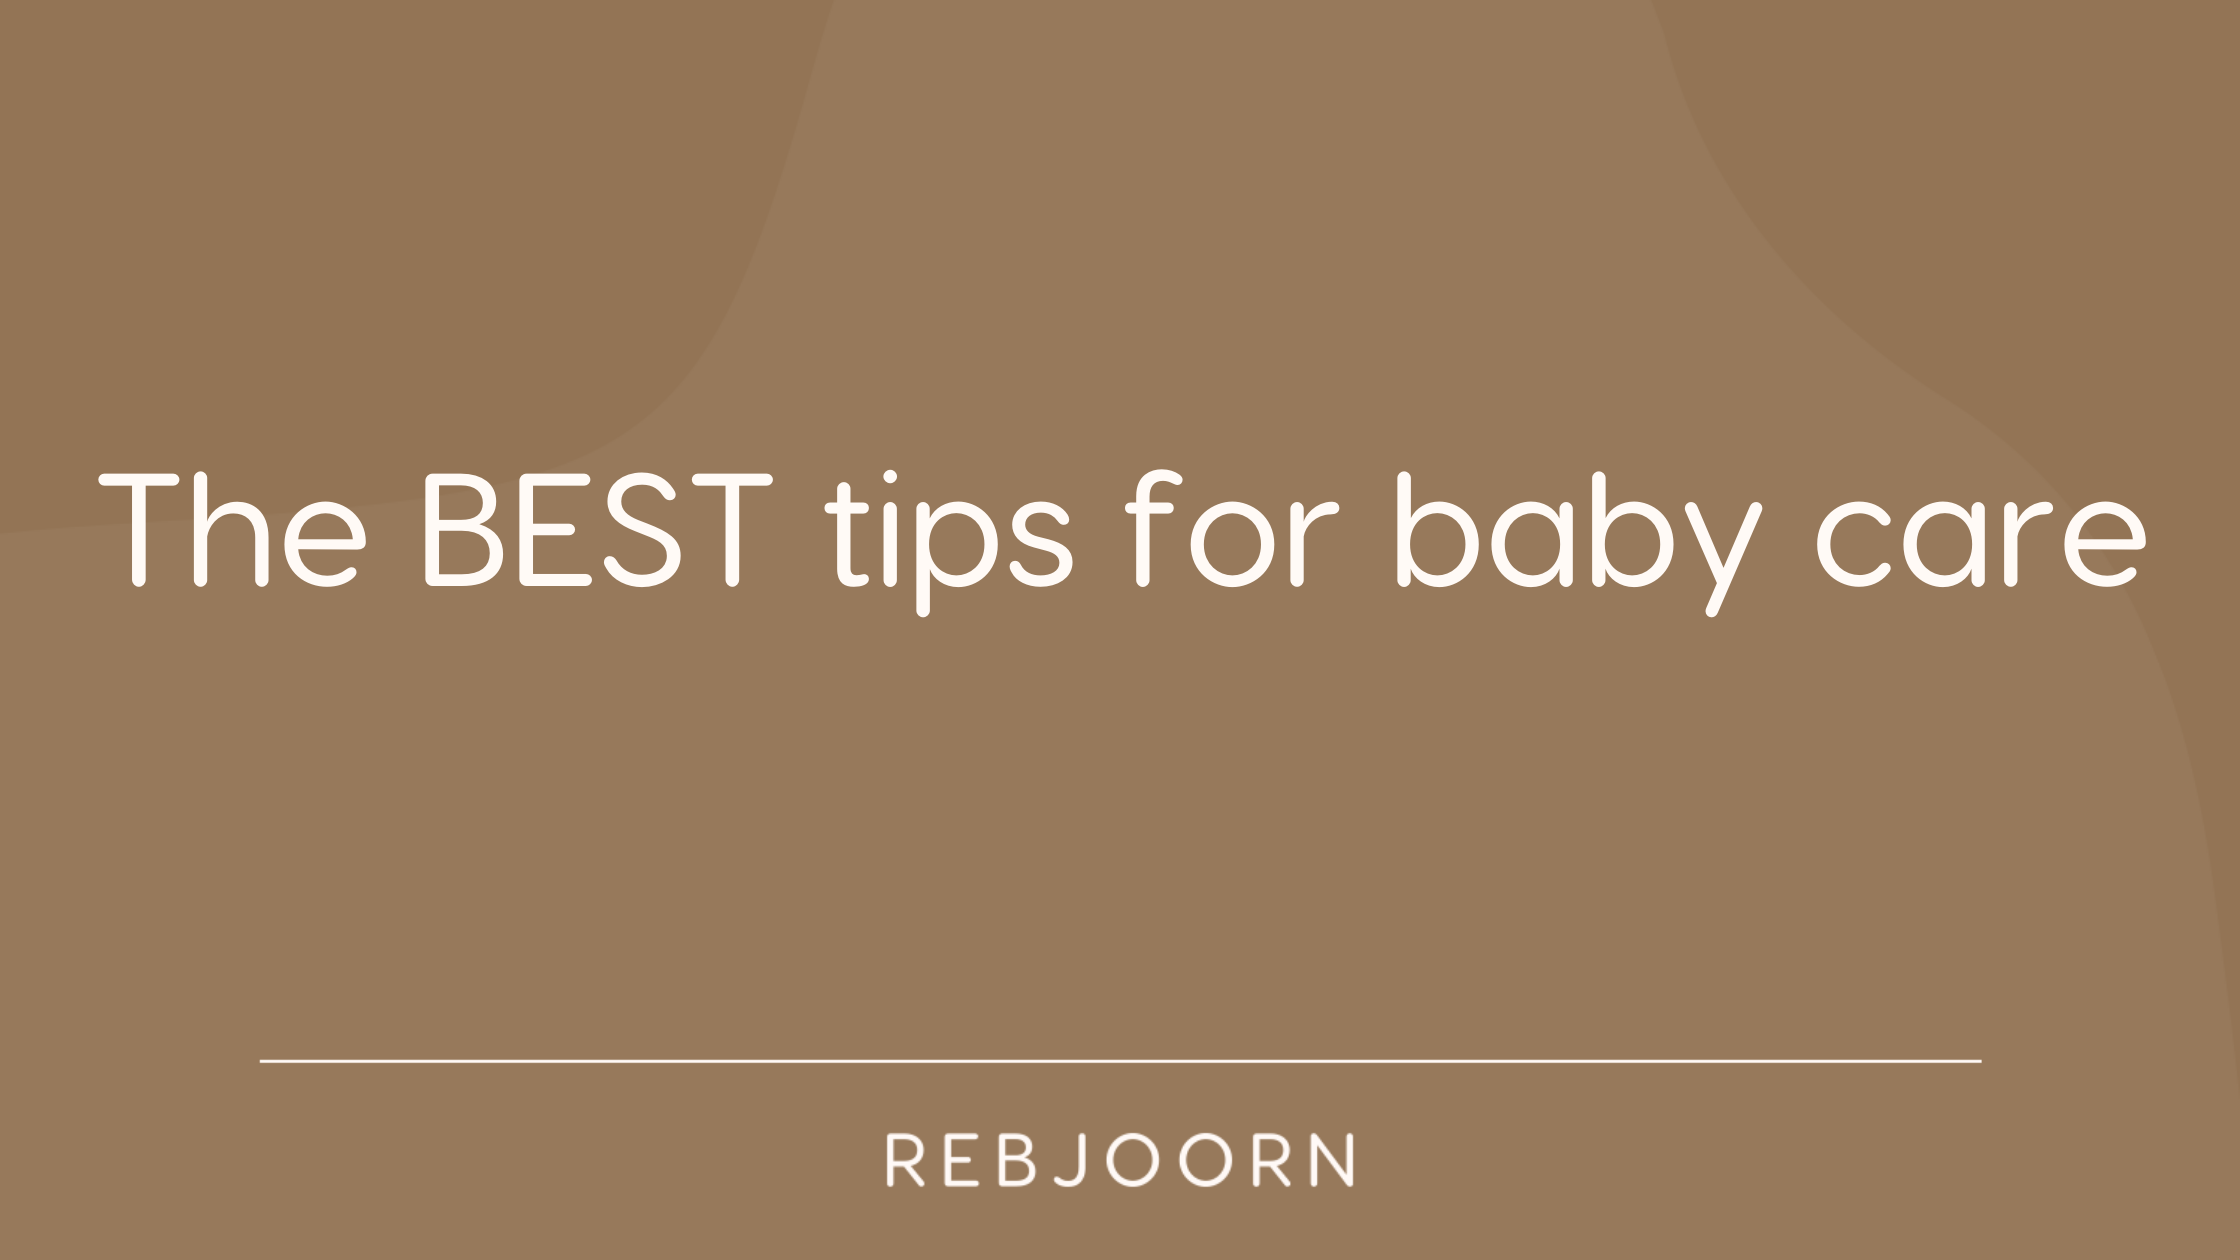 The BEST tips for baby care